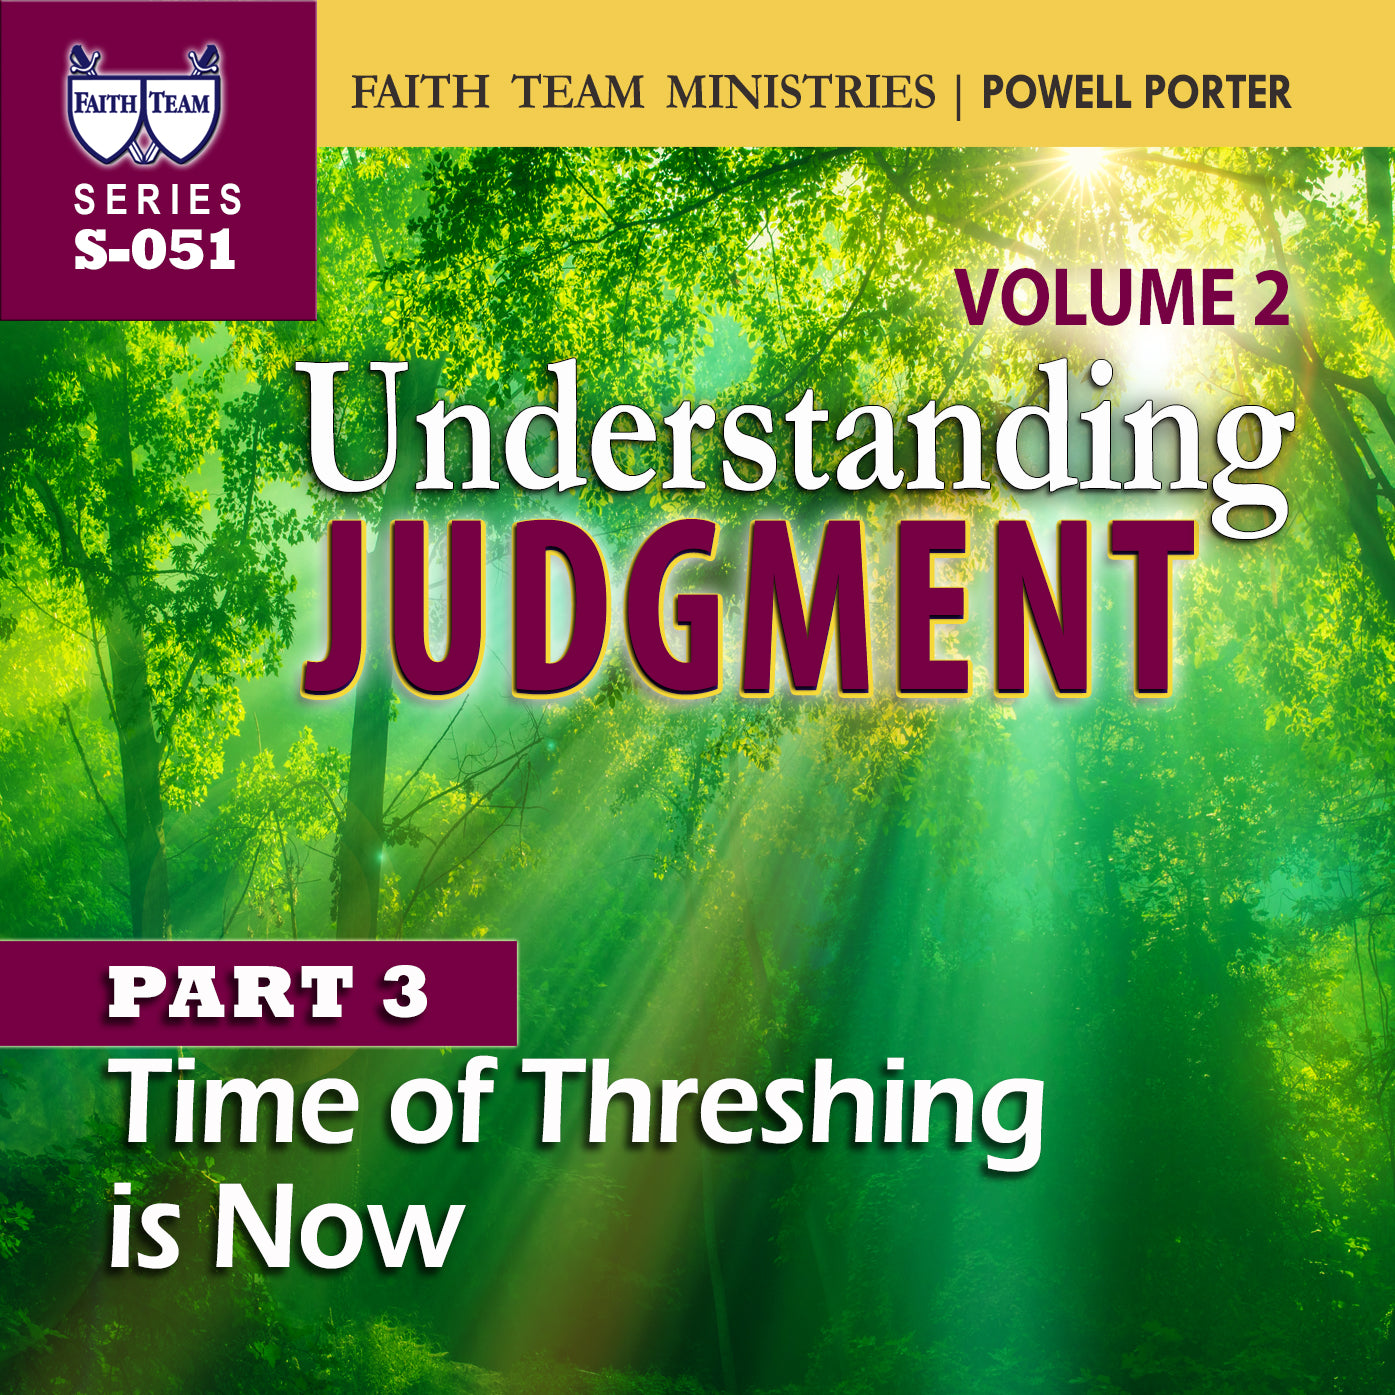 UNDERSTANDING JUDGMENT VOL.2 | Part 3: The Time Of Threshing Is Now!